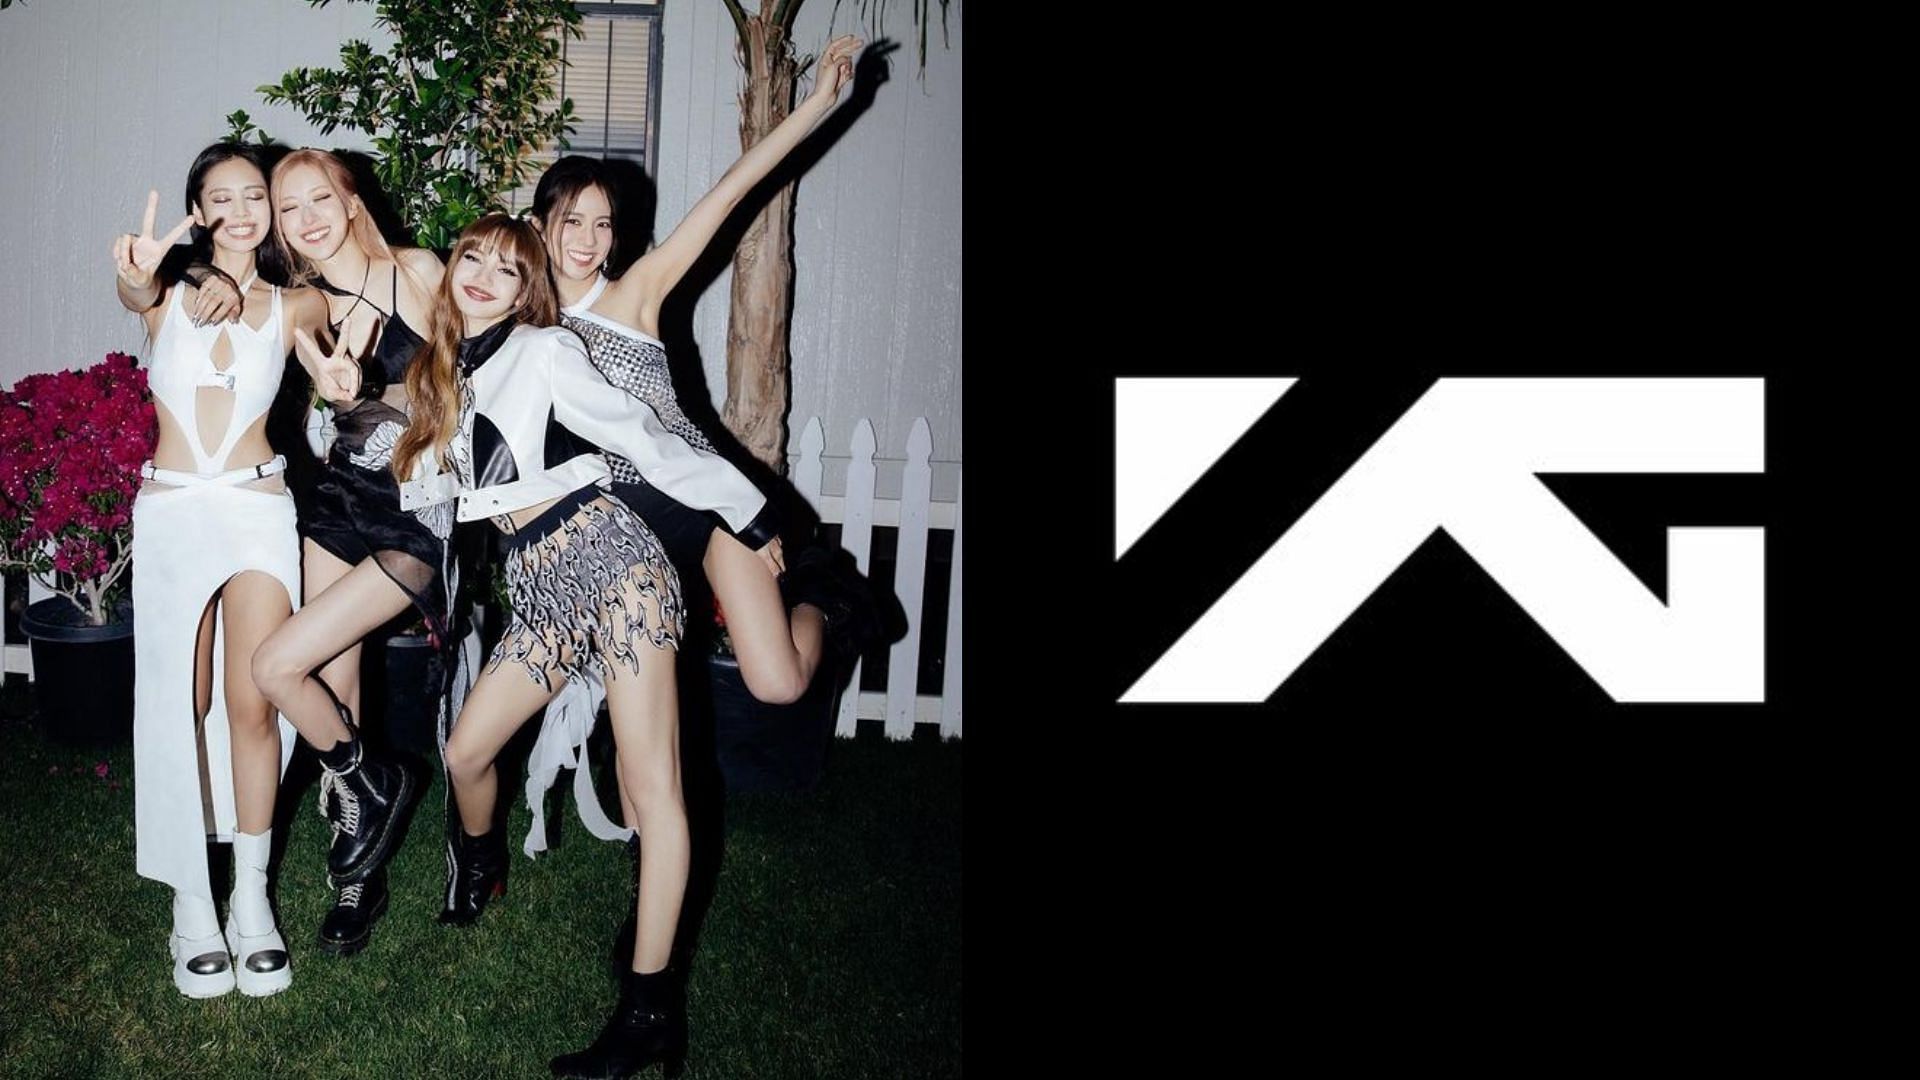 YG Entertainment announces a new team(Images via Twitter/ygent_official and Blackpinkofficial)